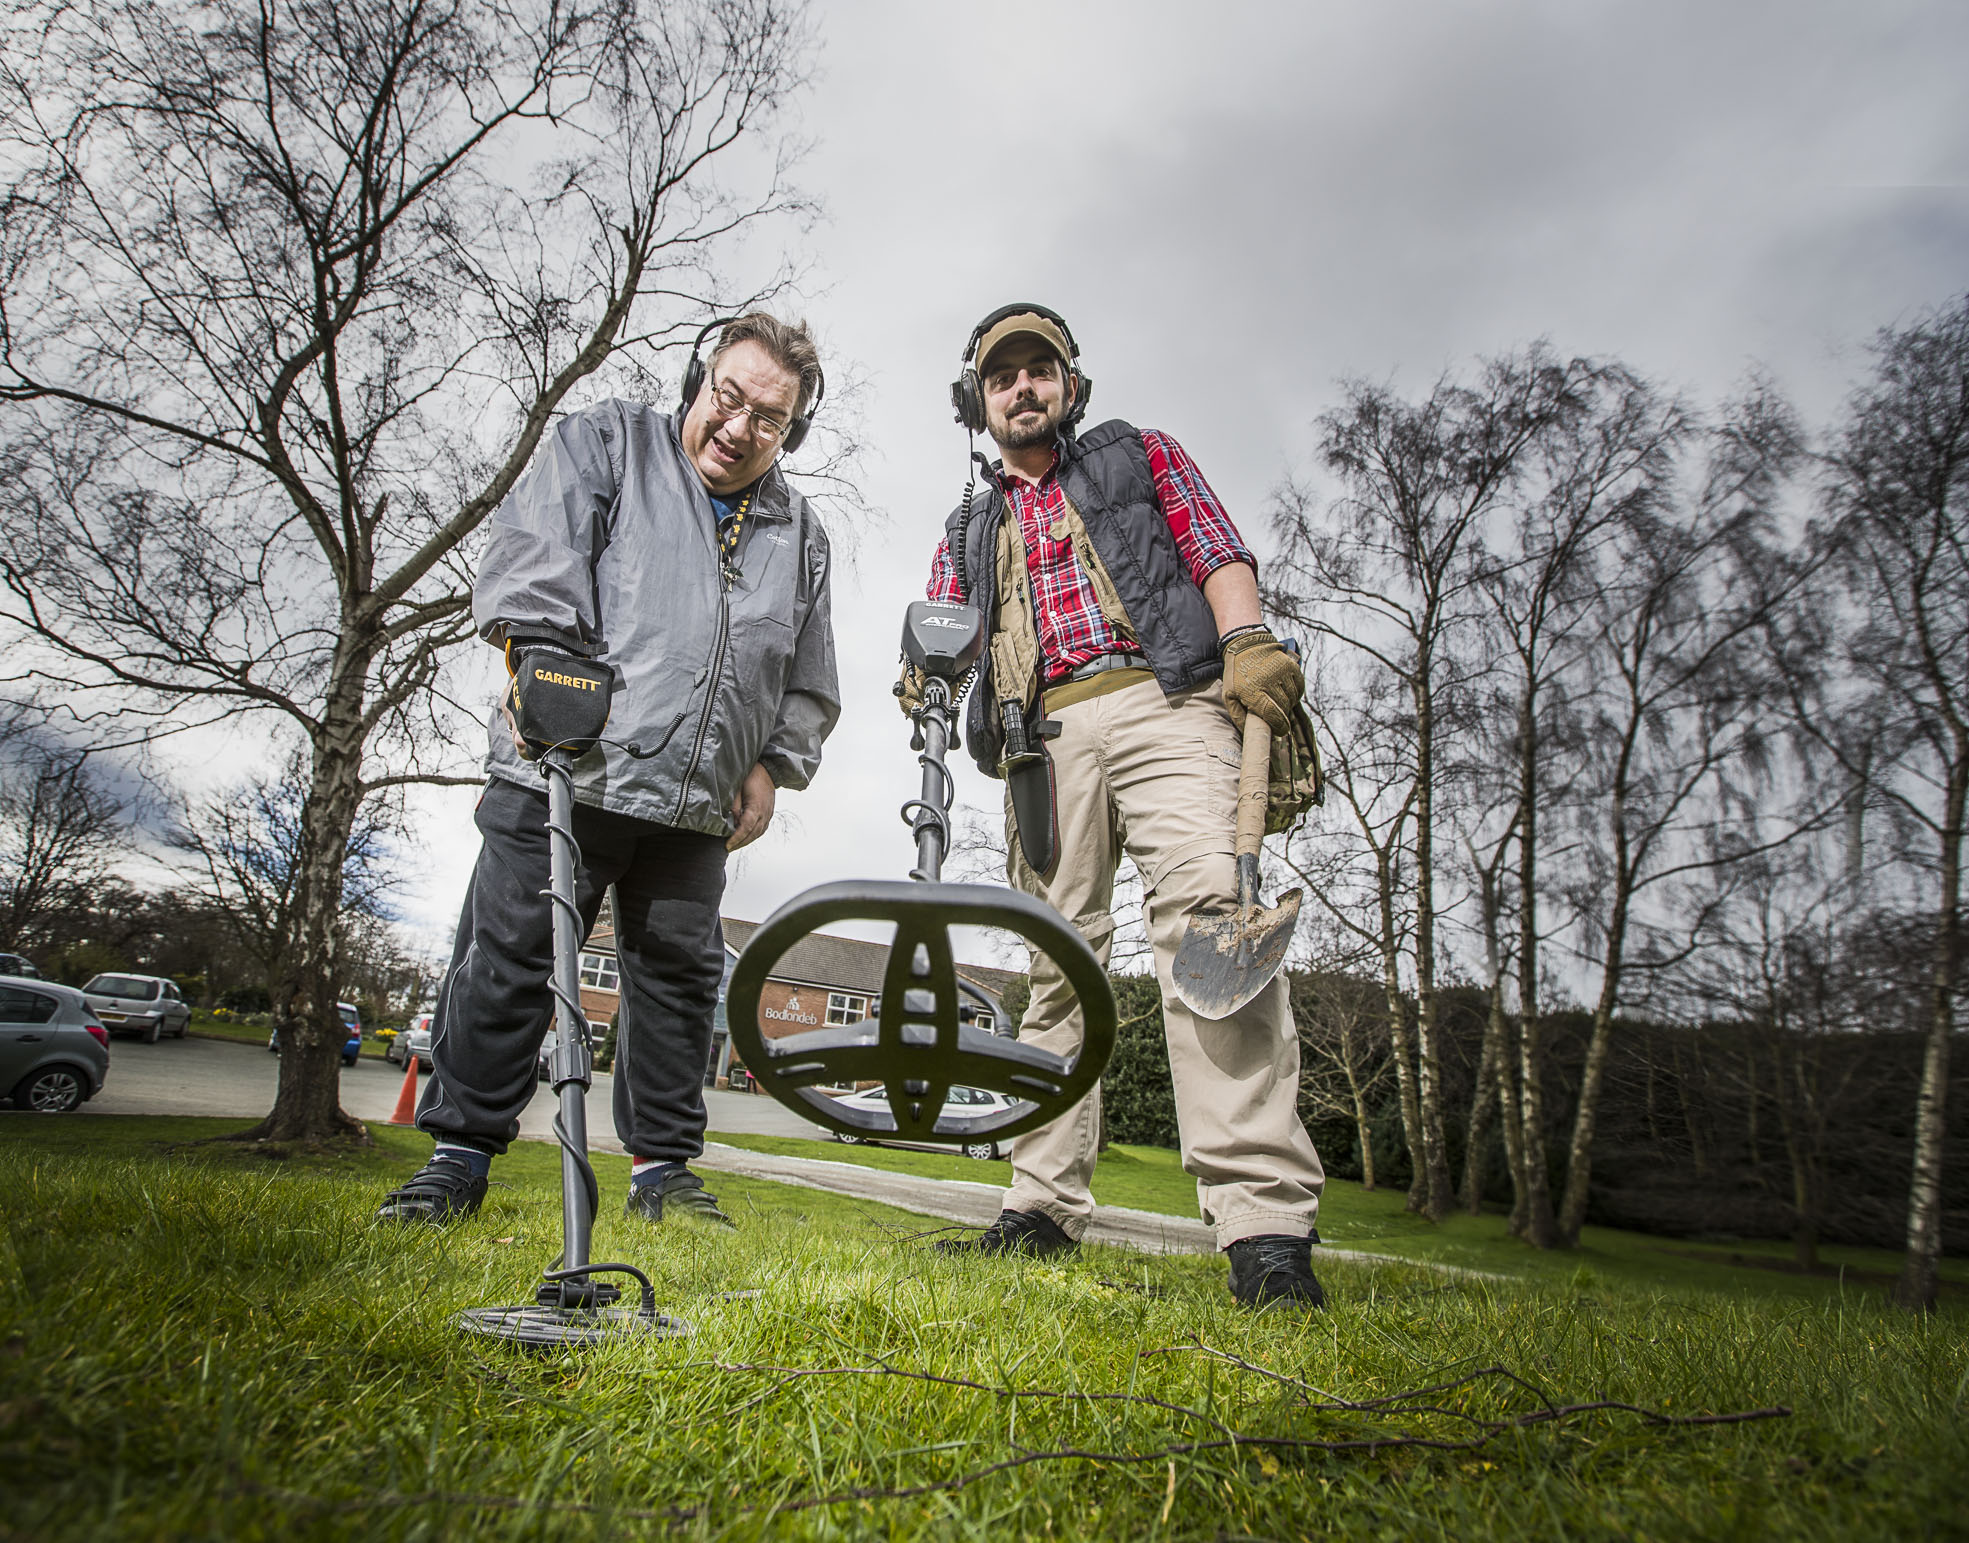 Care home resident Gary turns metal detector